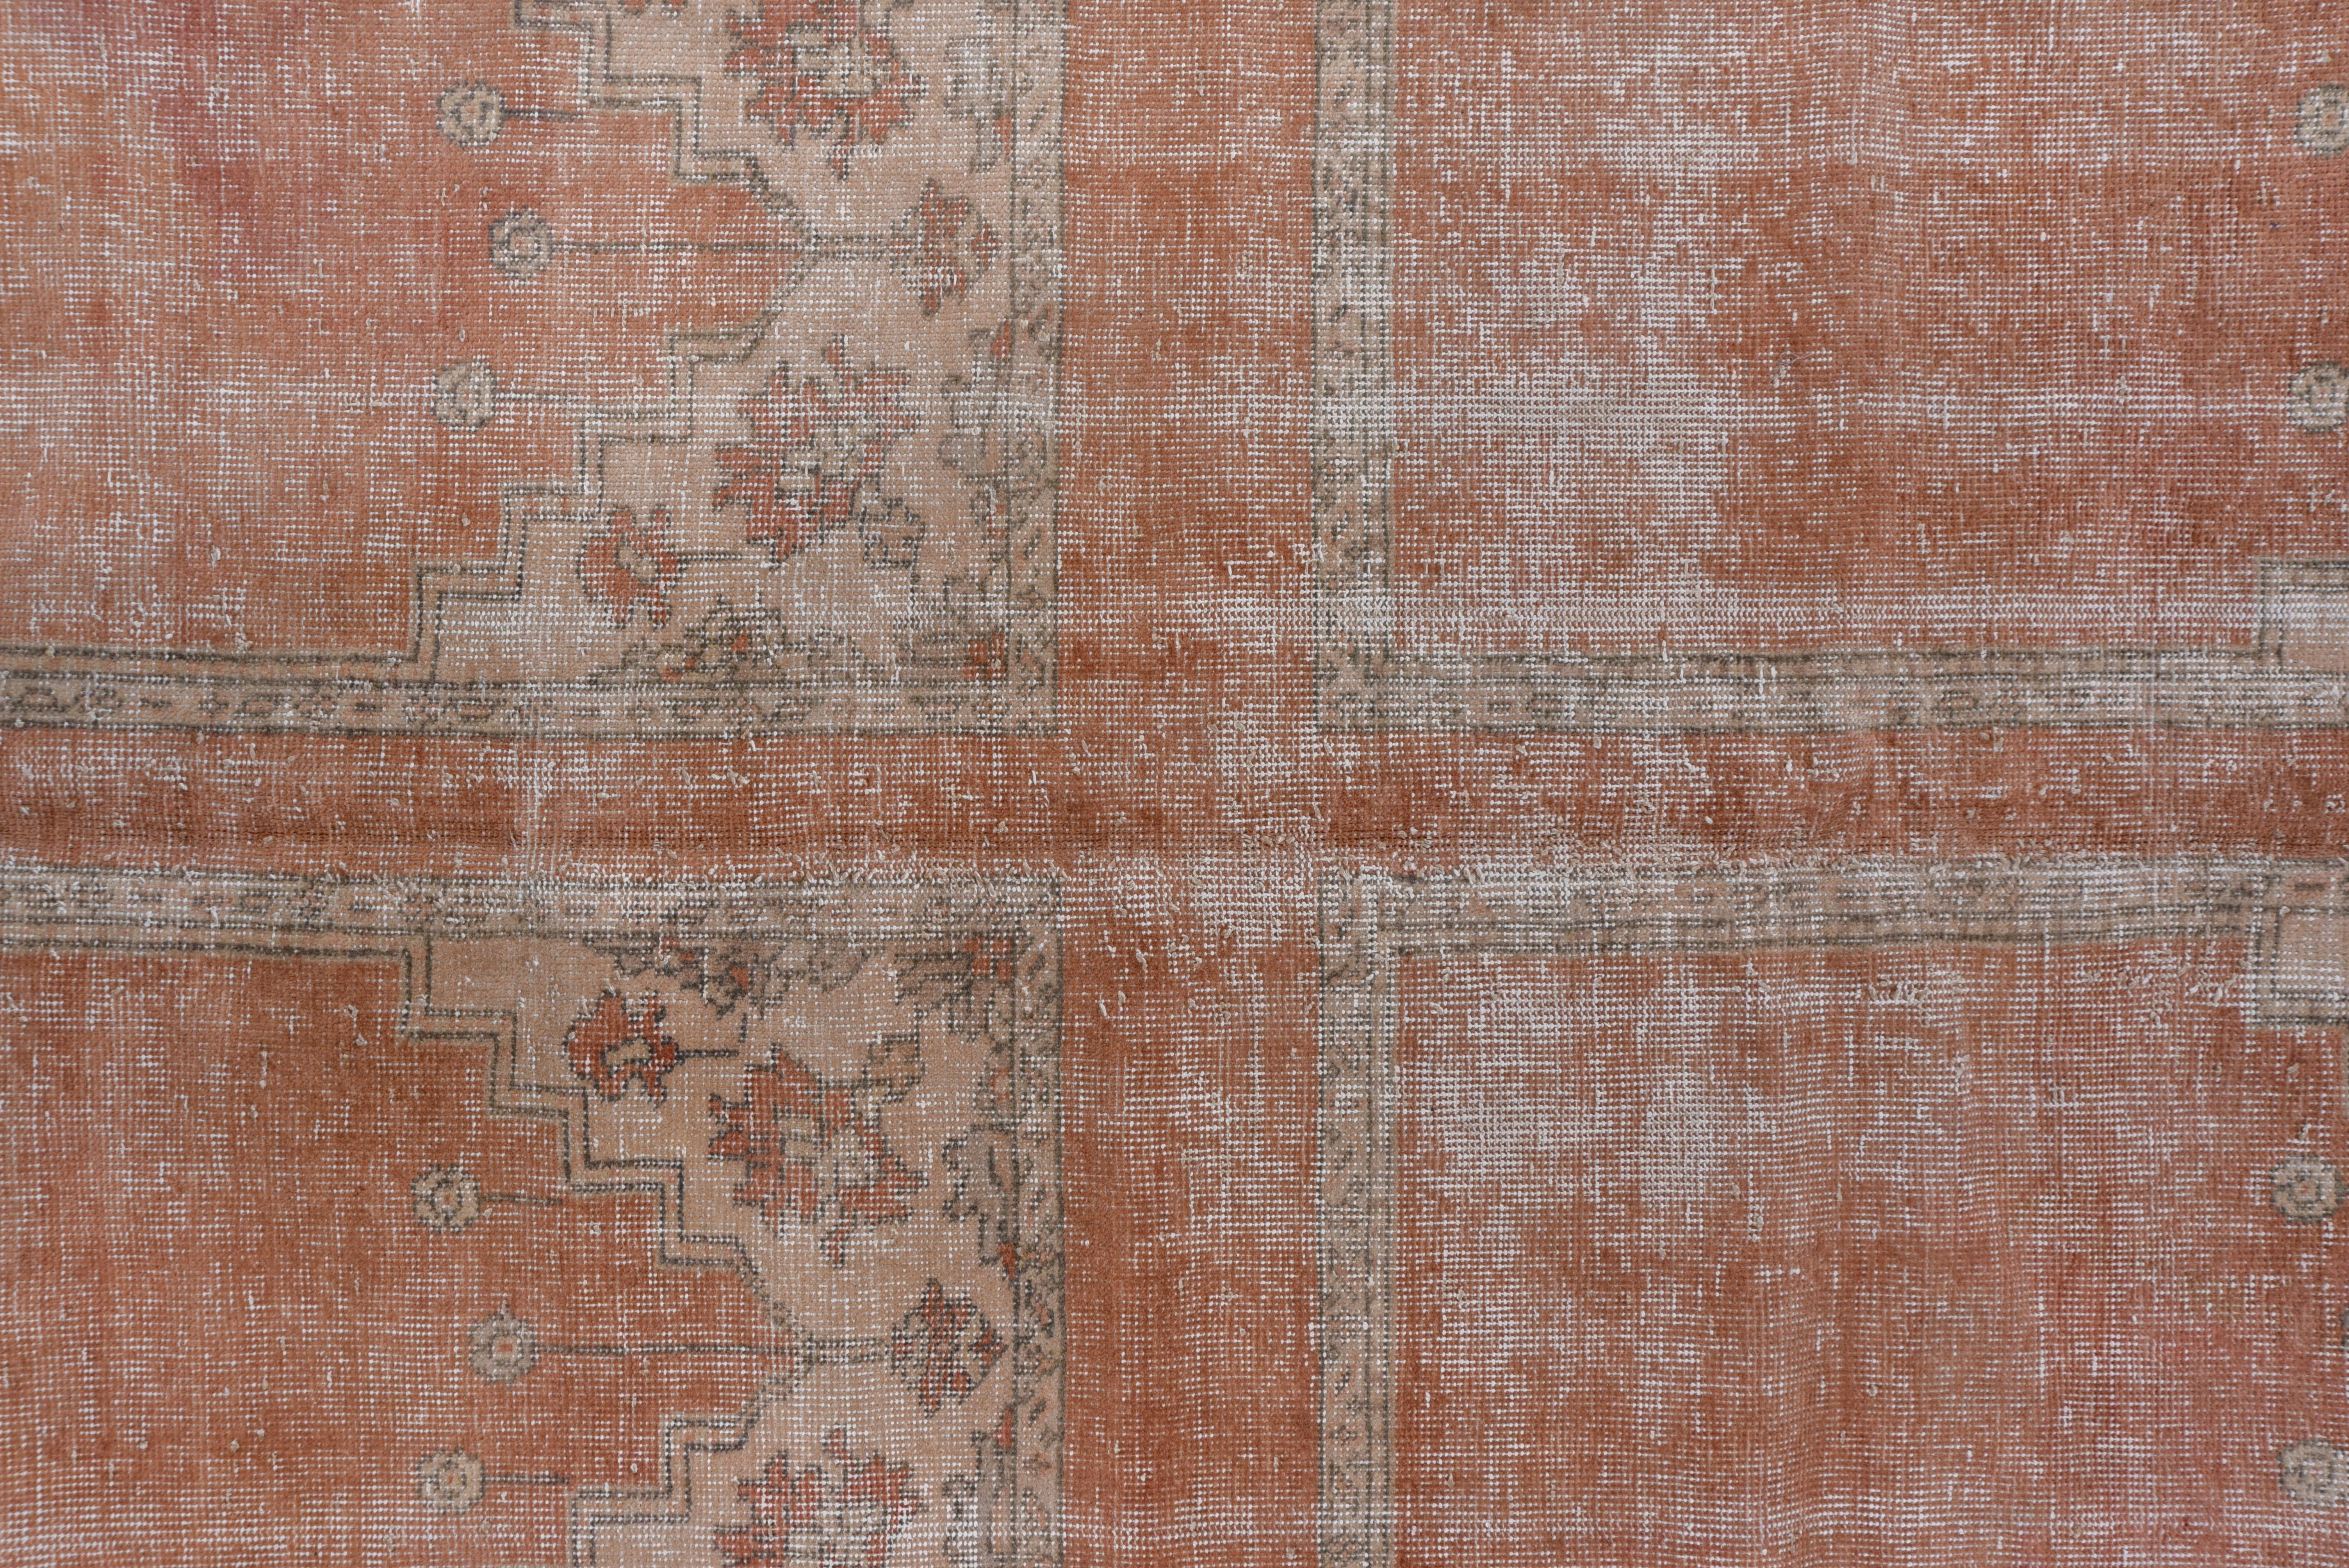 In a saph pattern of four rows of four plain pink niches under ivory spandrels. Saphs were woven in Oushak in large sizes for mosque prayer halls and this is a very rare example from the early 20th century, the wear/distress notwithstanding.